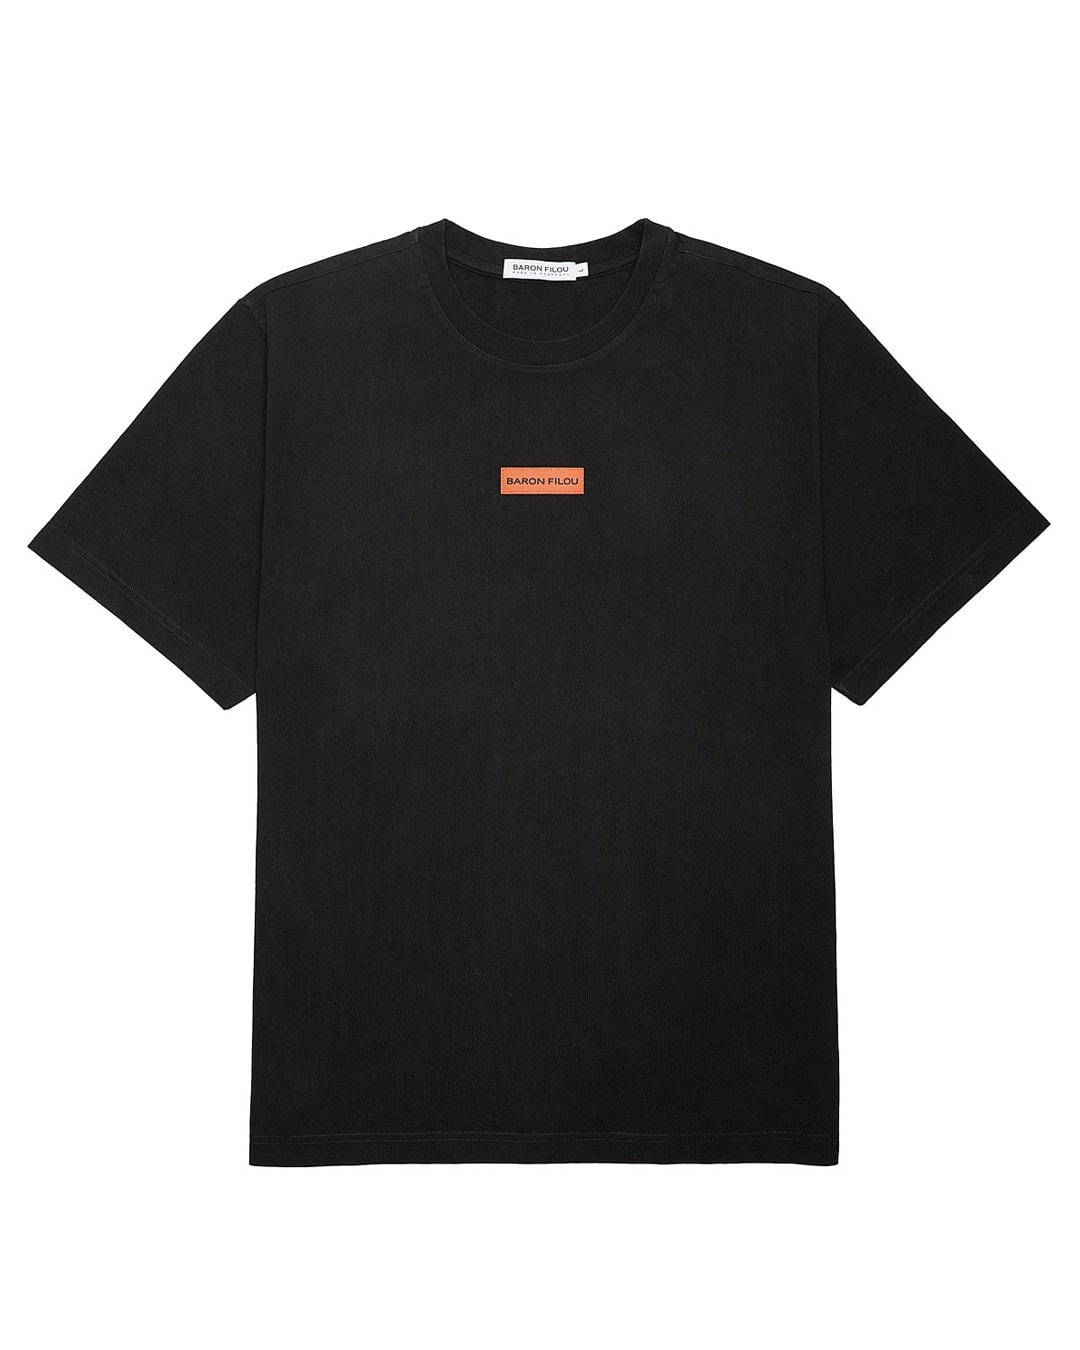 Louis Vuitton Inside Out T-Shirt | Size S, Apparel in Black